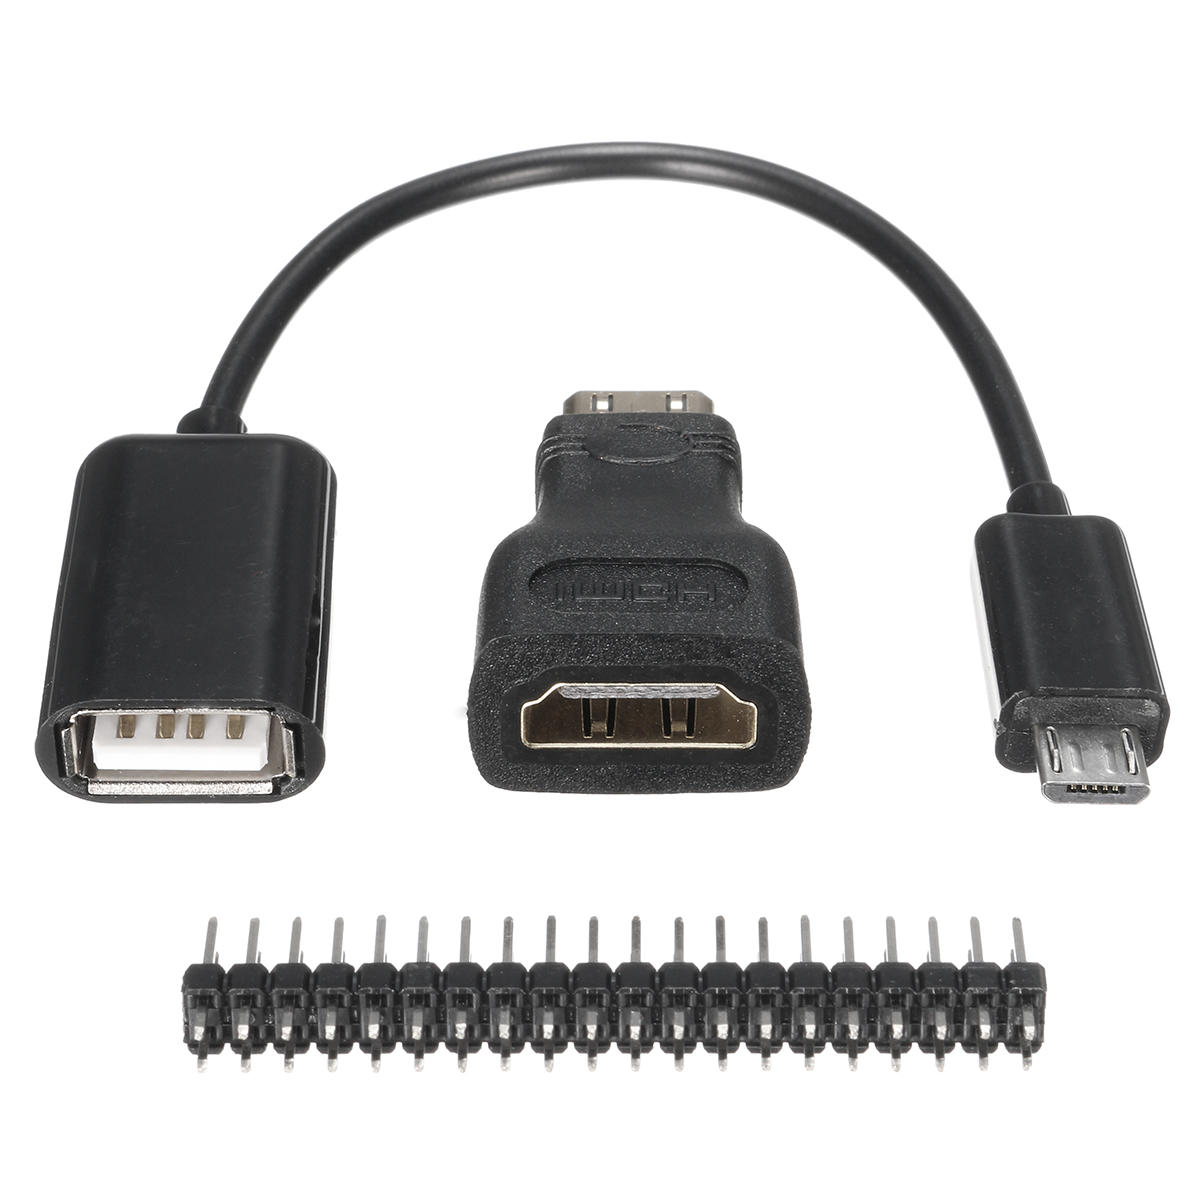 3 in 1 Mini HD to HD Adapter+Micro USB to USB Female Power Cable+40P Pin Kits For Raspberry Pi Zero